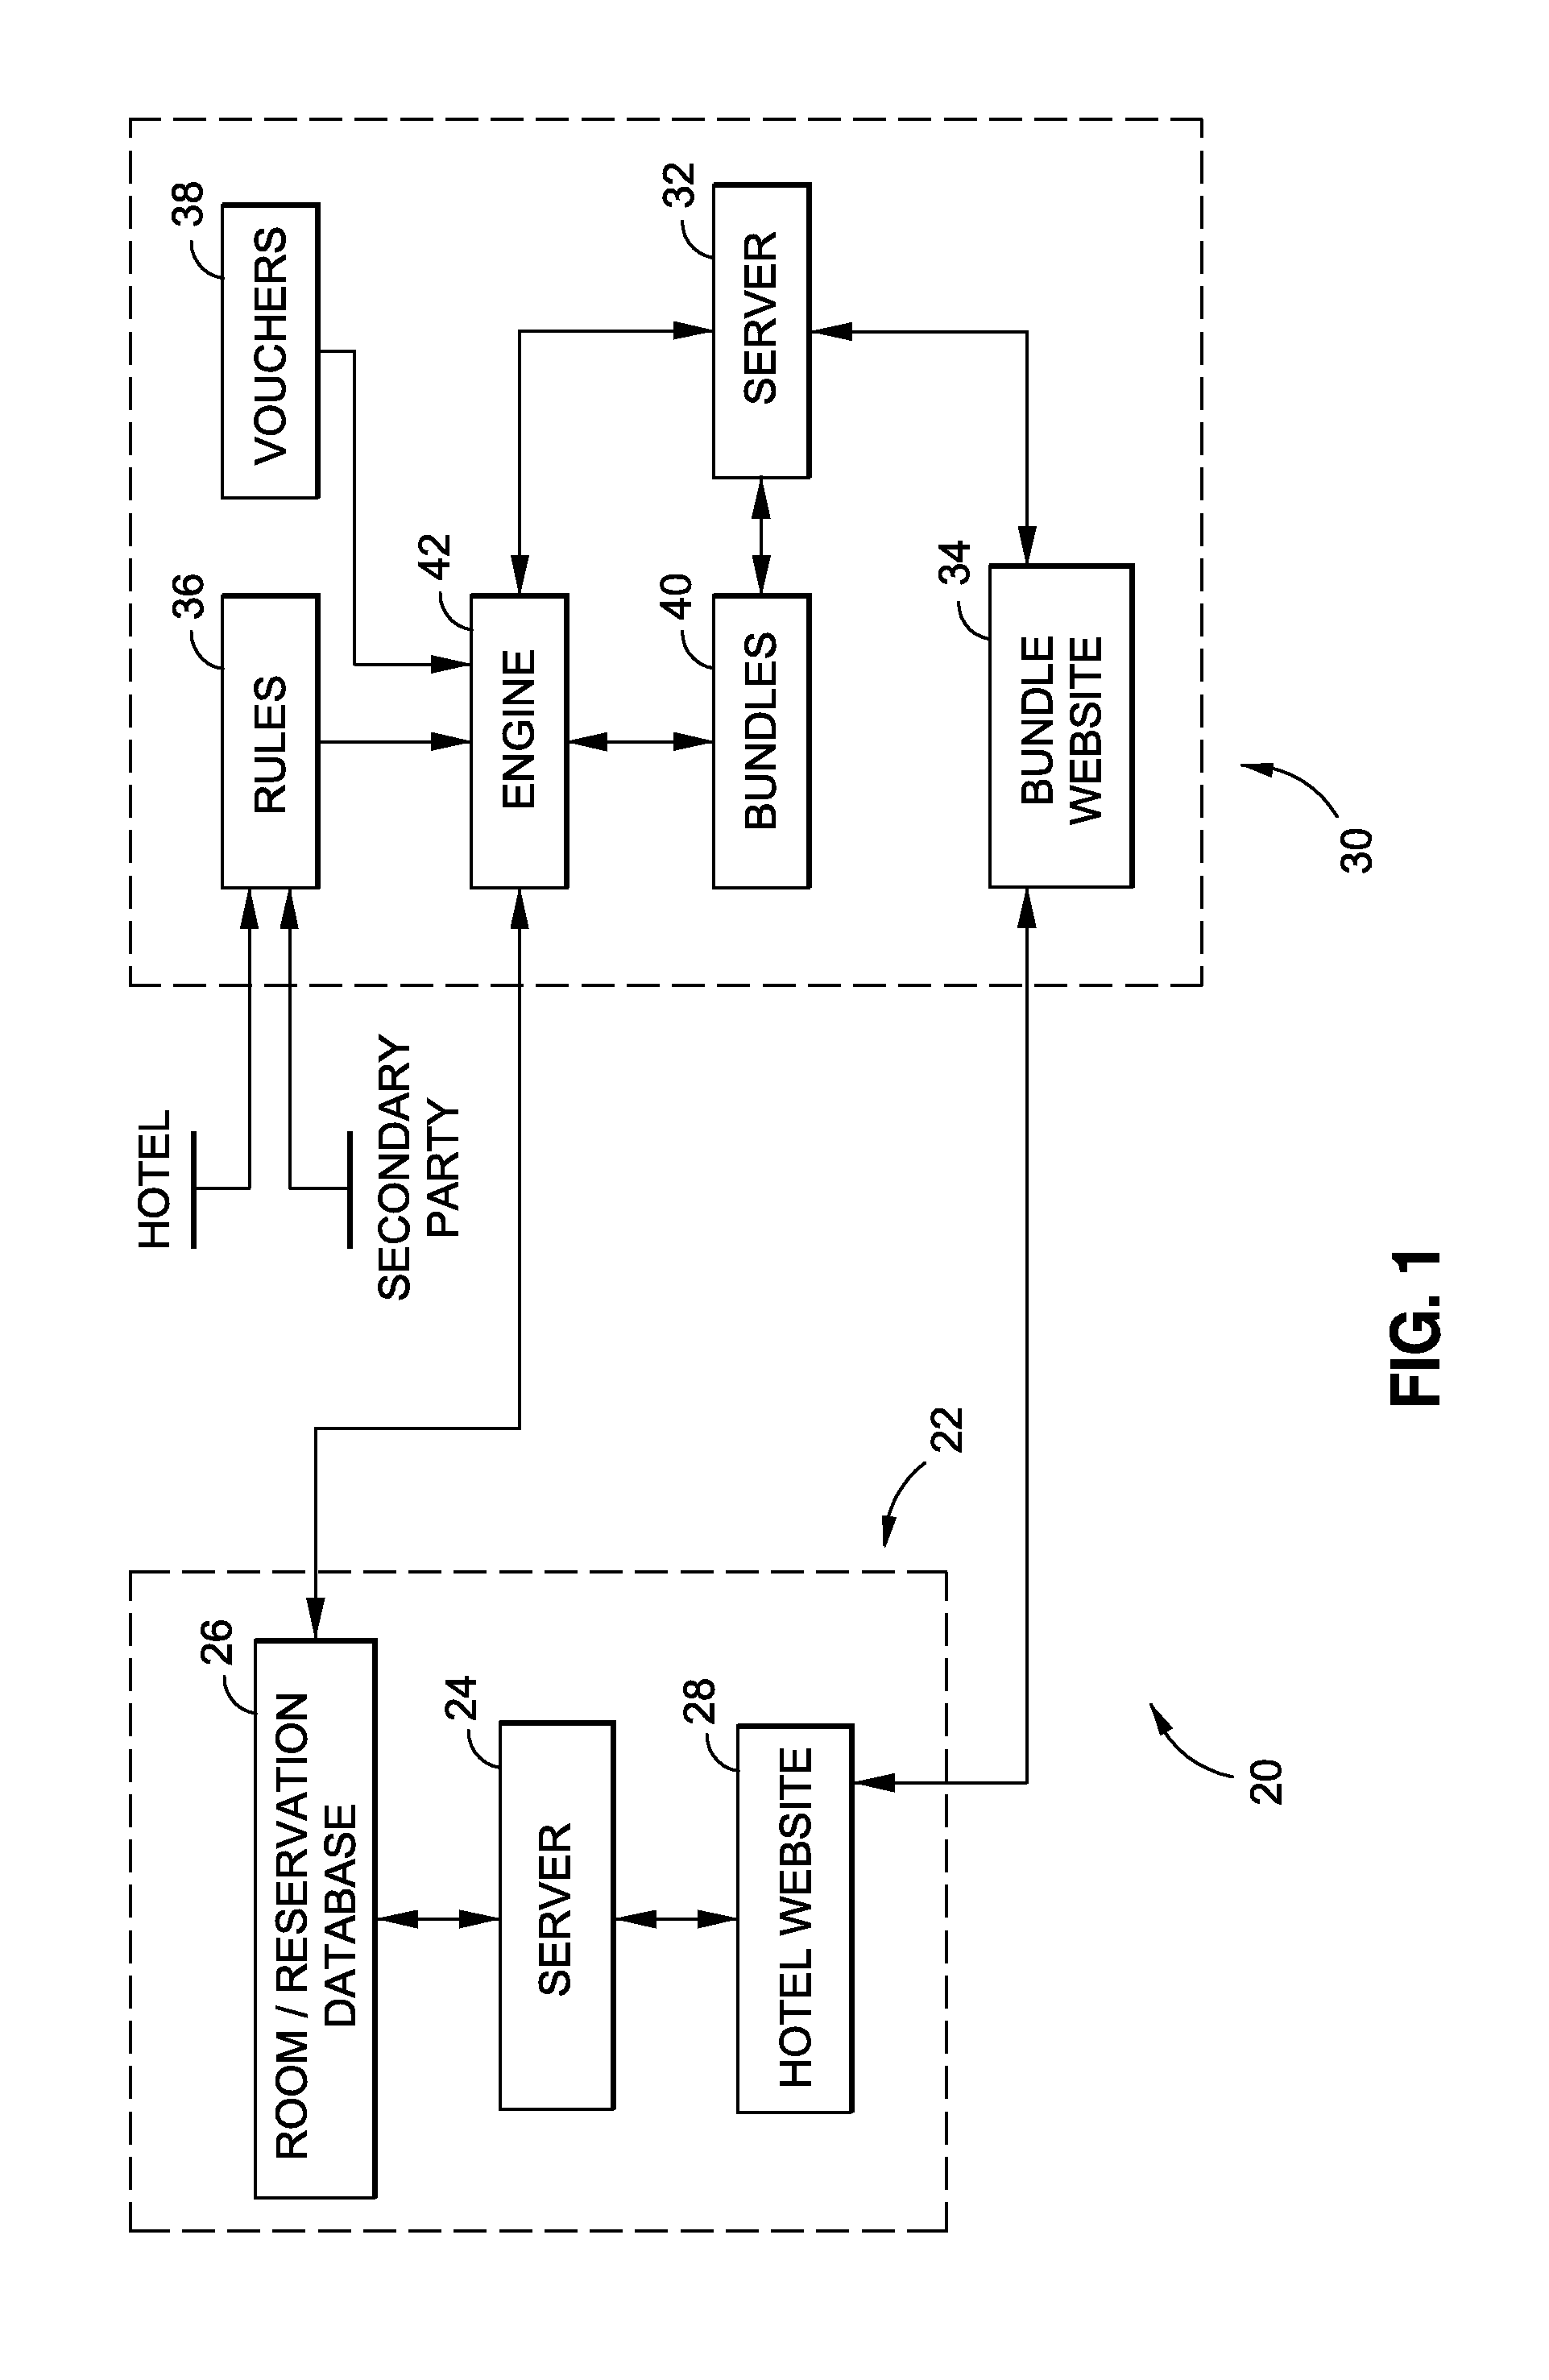 Method and system for offering combinations of goods and services for purchase and controlling expenses